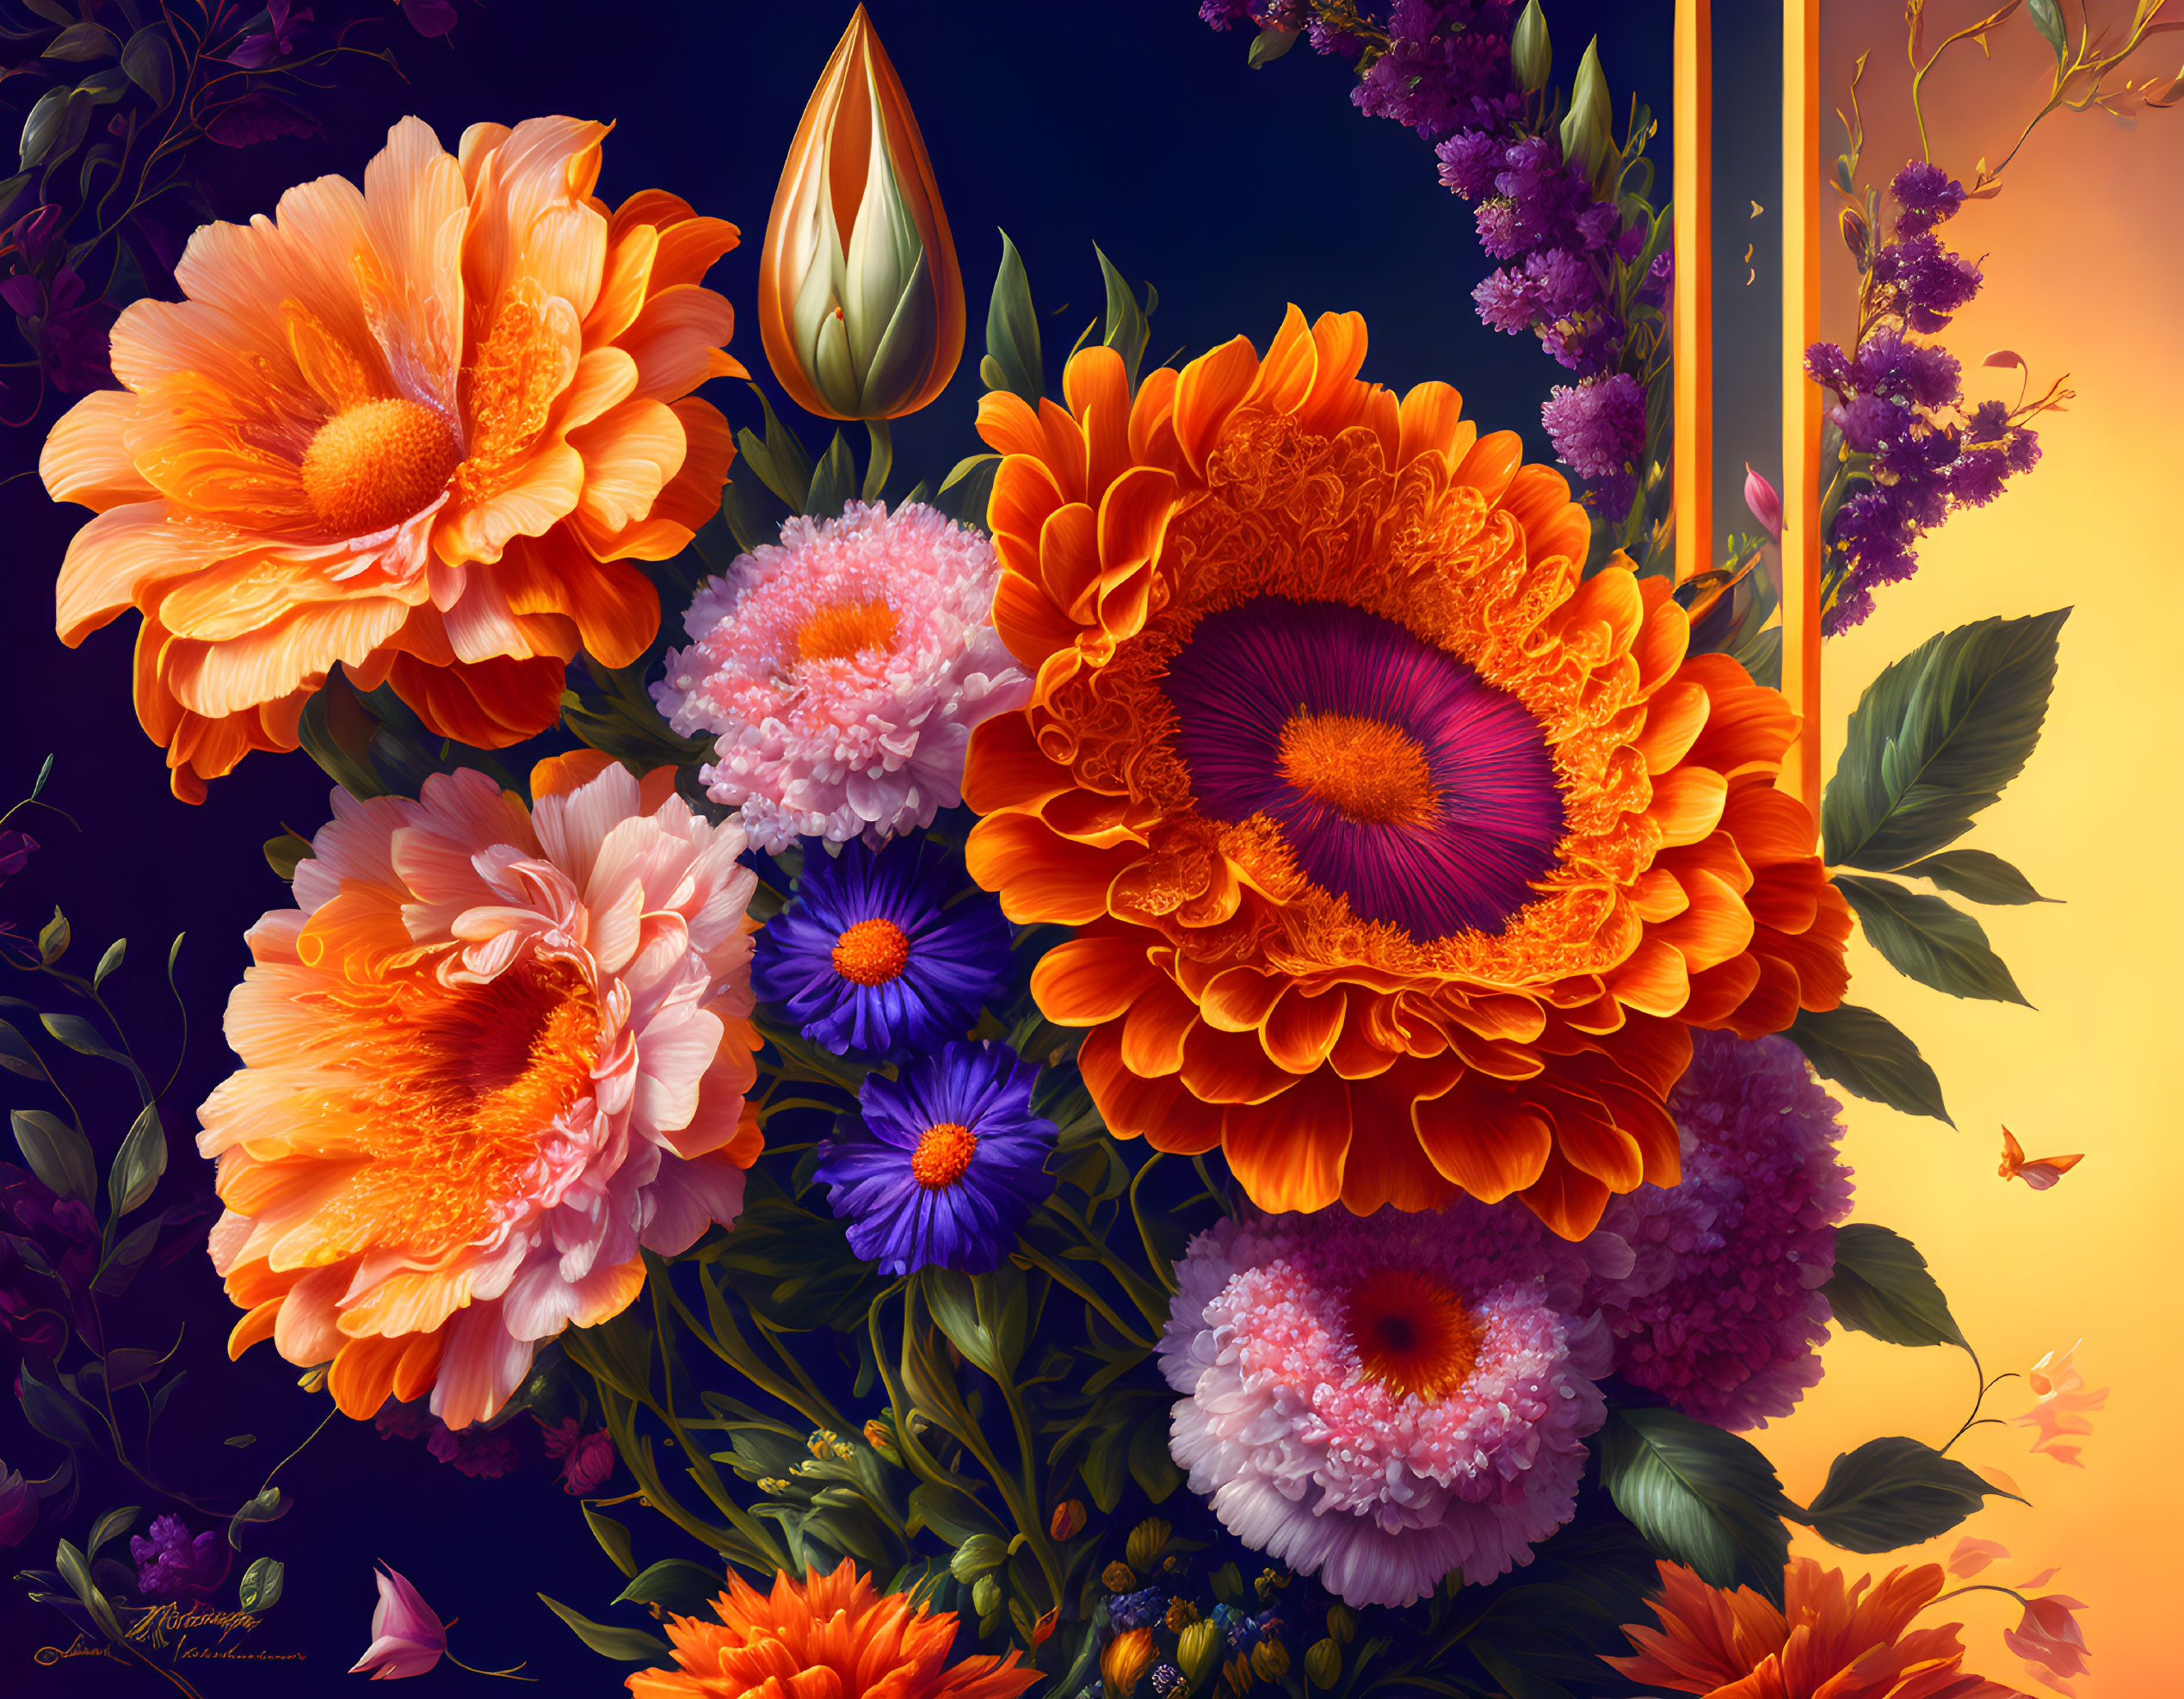 Colorful digital artwork featuring assorted flowers, orange blooms, purple accents, golden droplet, and subtle